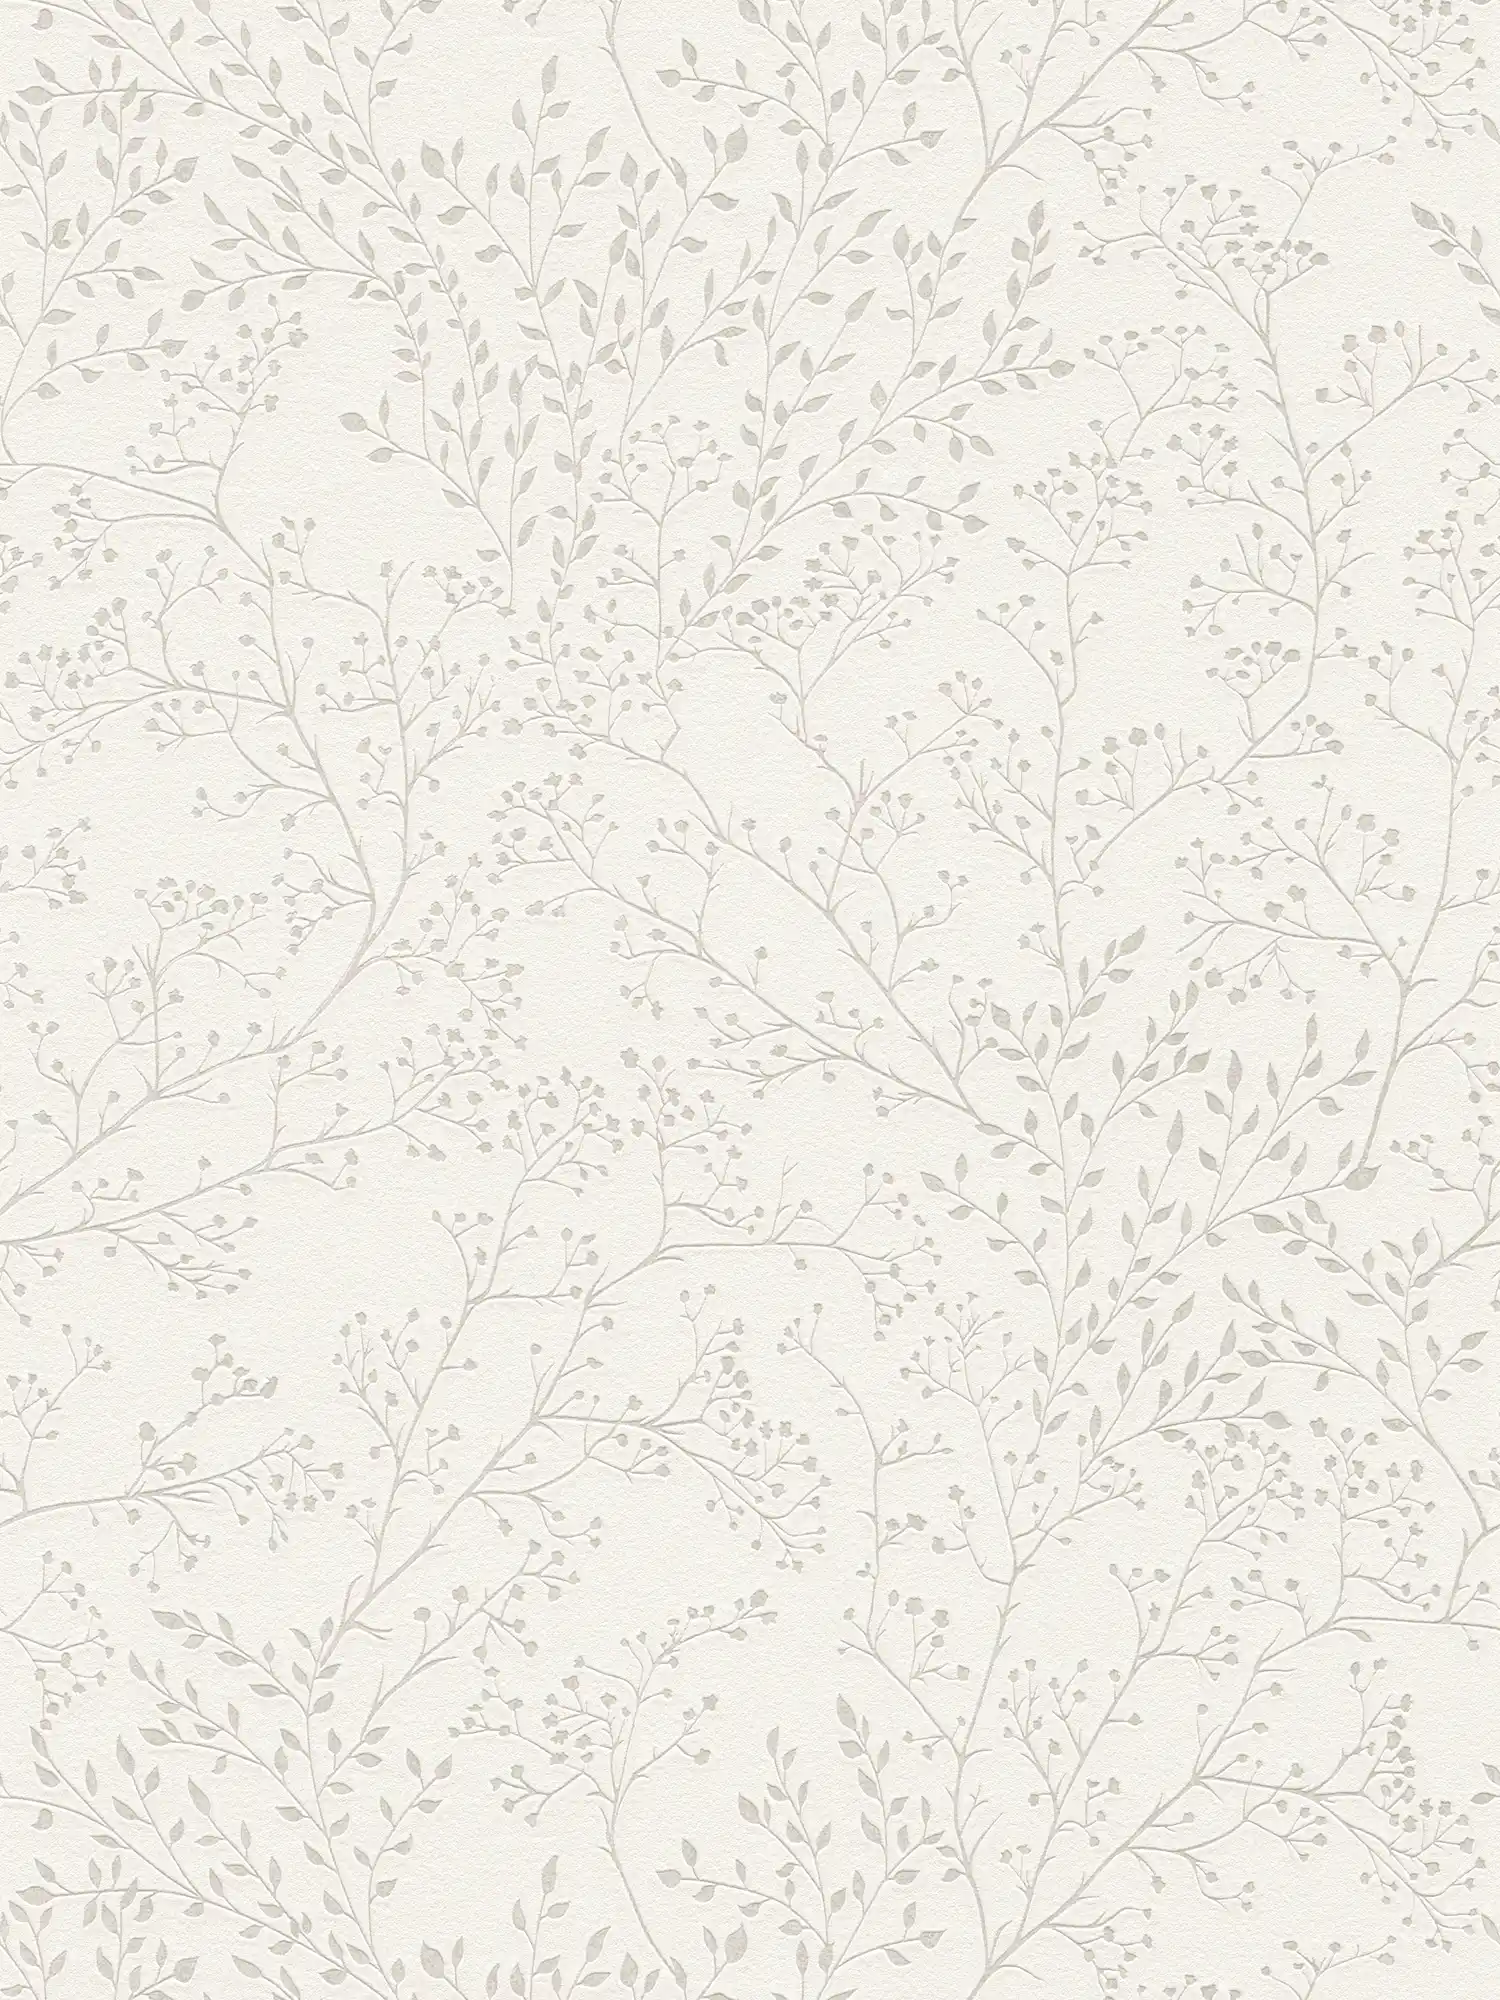 Plain wallpaper cream white with leaves pattern, gloss & texture effect
